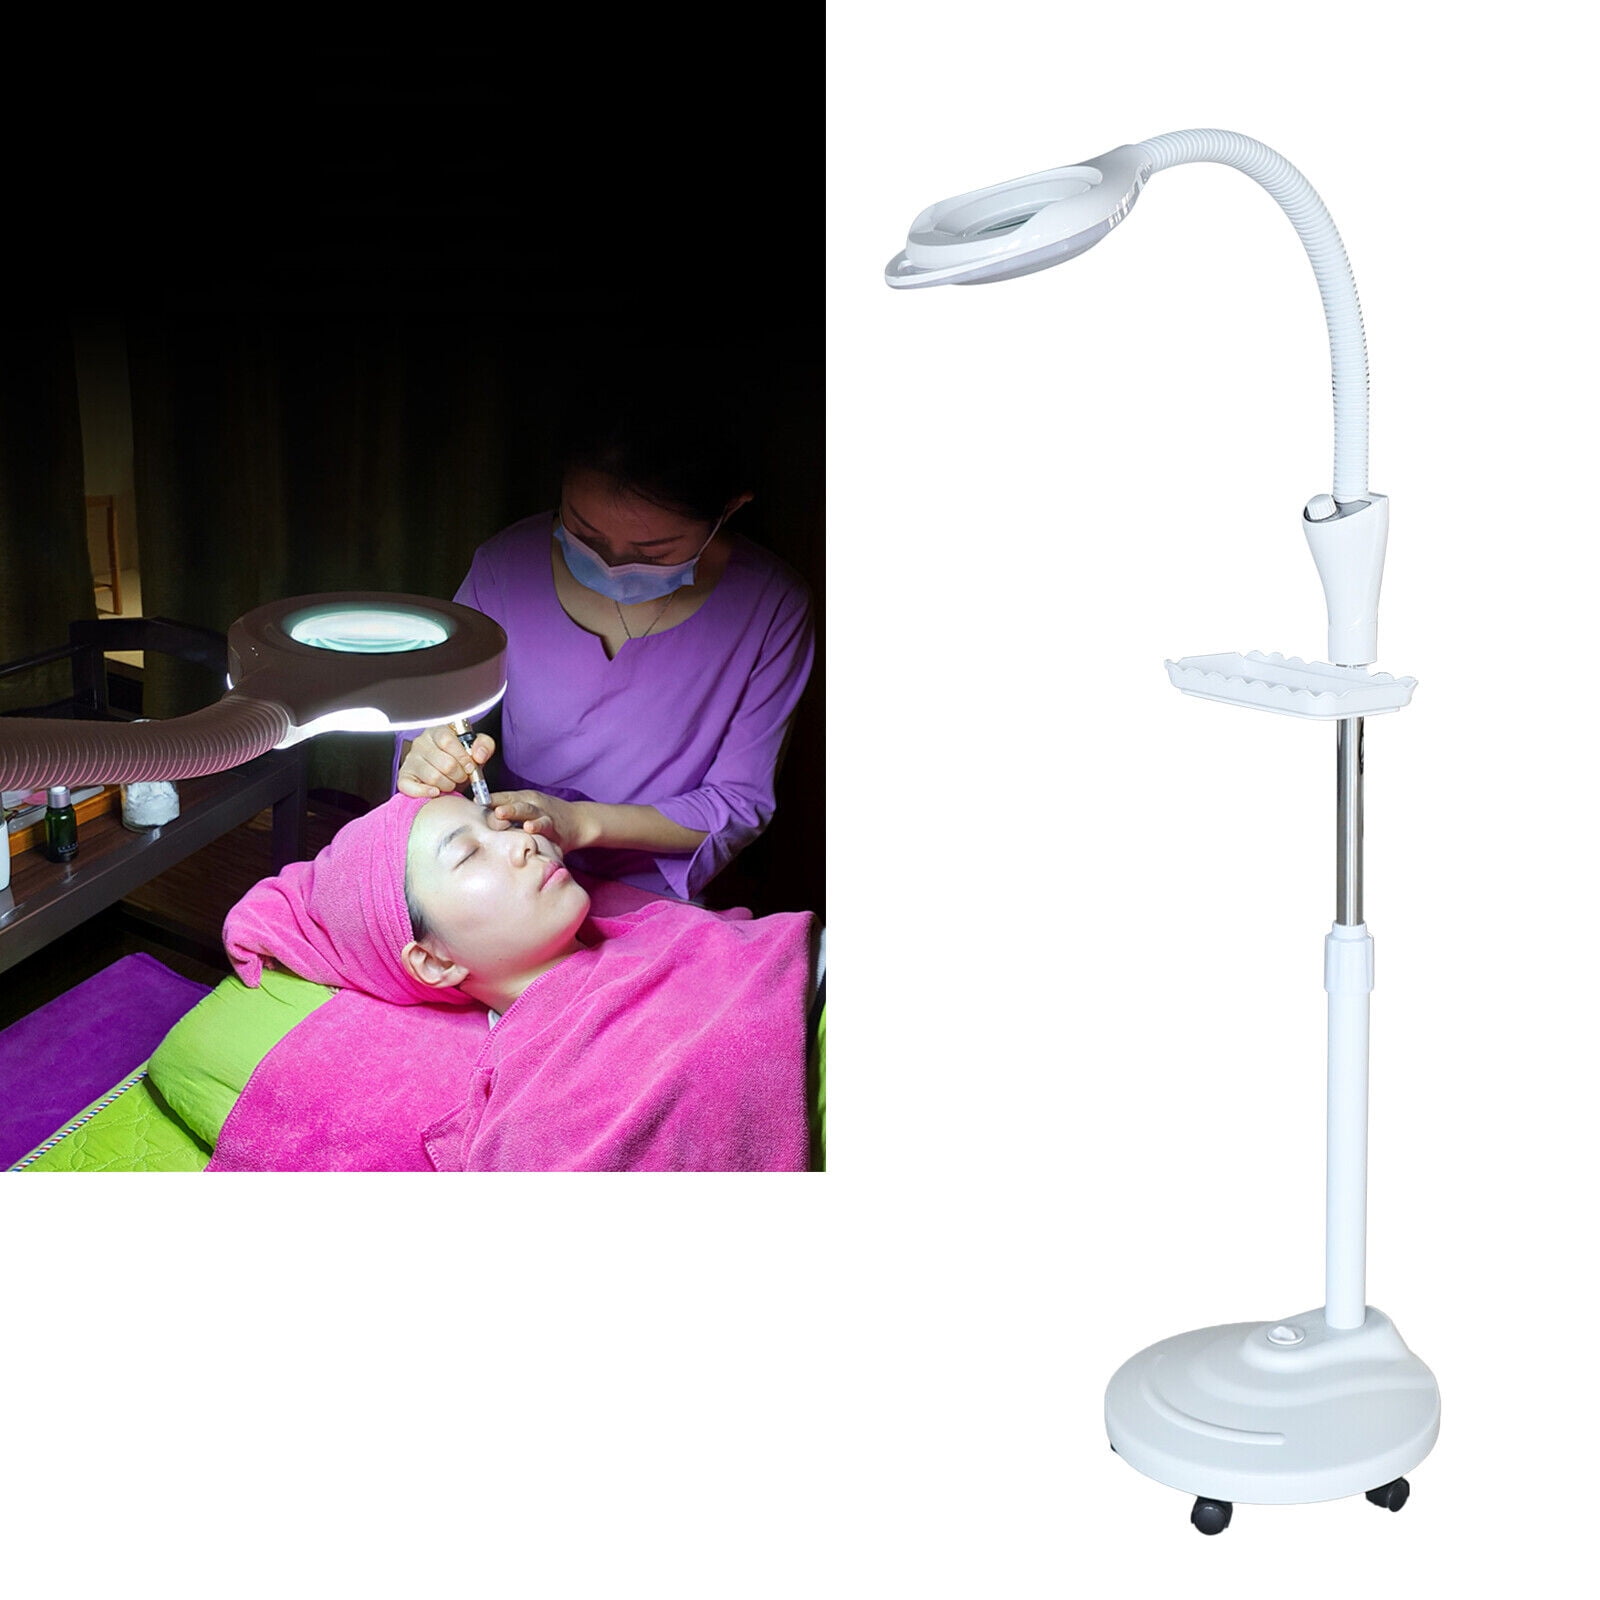 YS-709 Hospital Beauty Clinic Magnifier With LED Light Magnifying